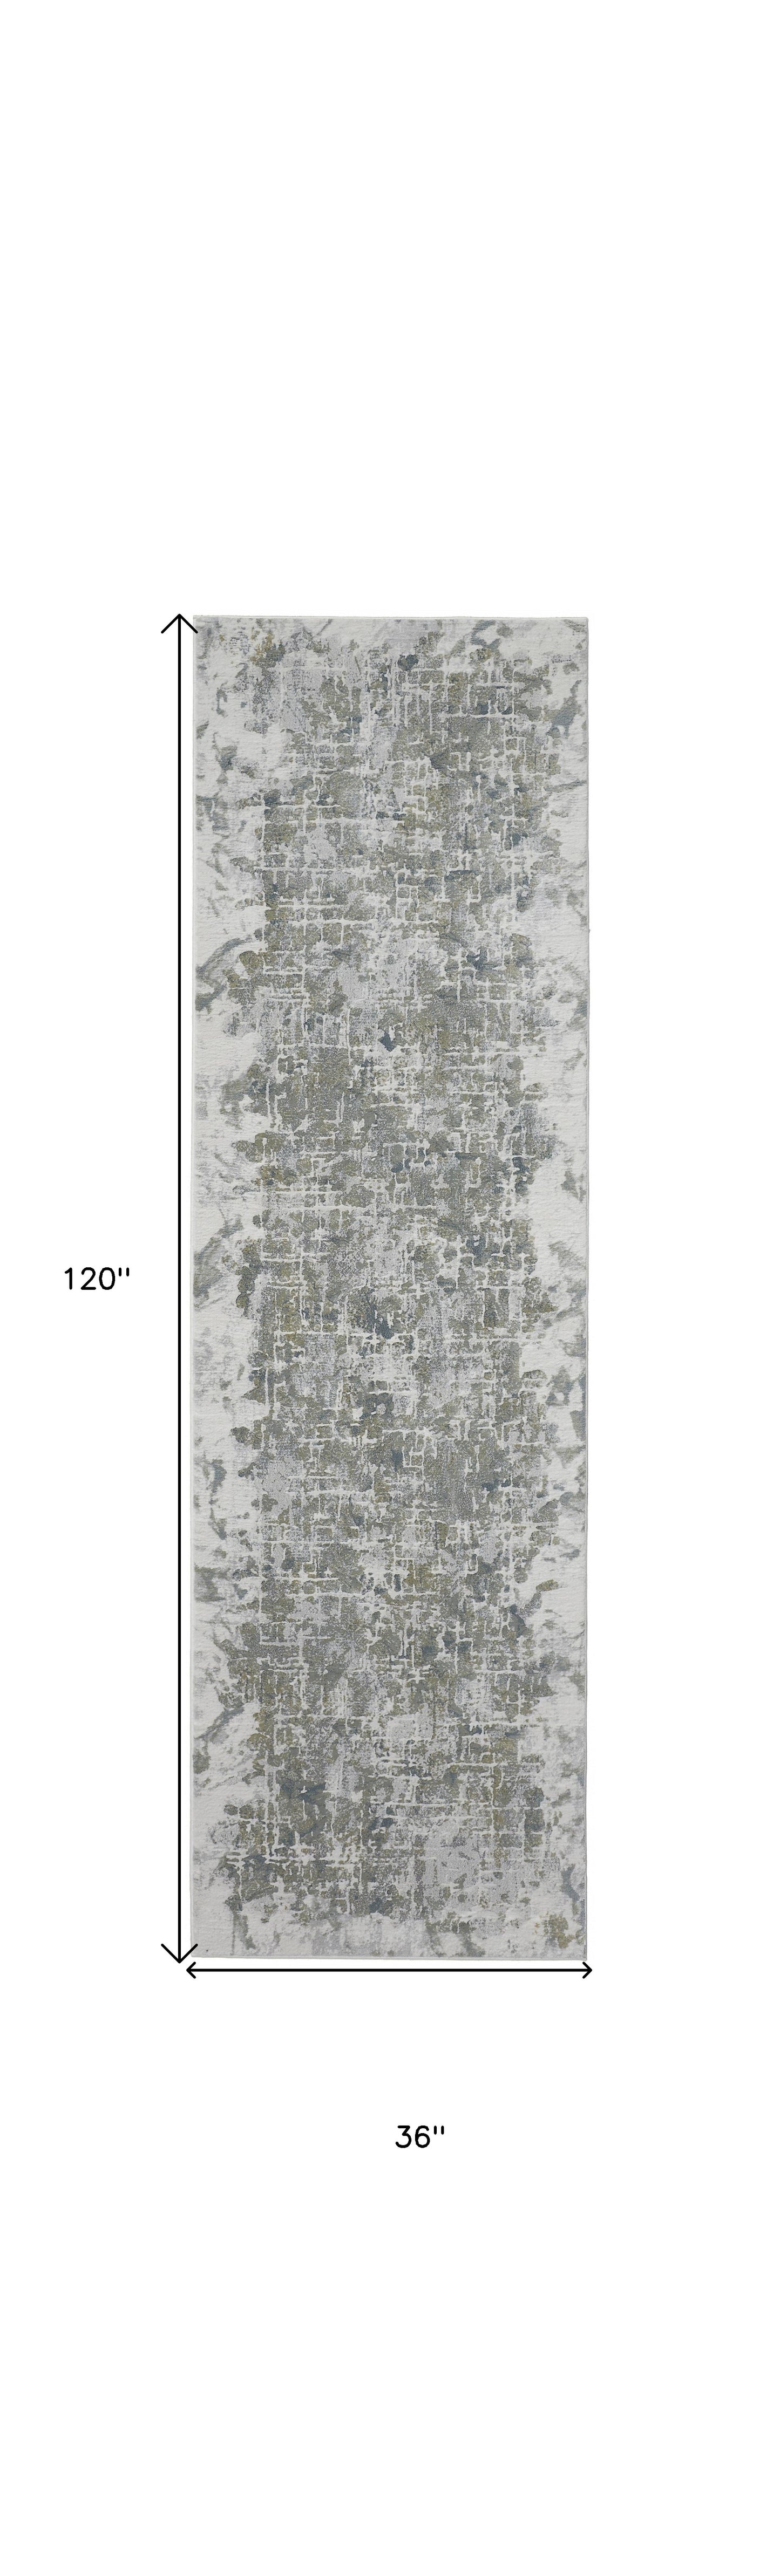 3' X 5' Green Gray And Ivory Abstract Distressed Stain Resistant Area Rug